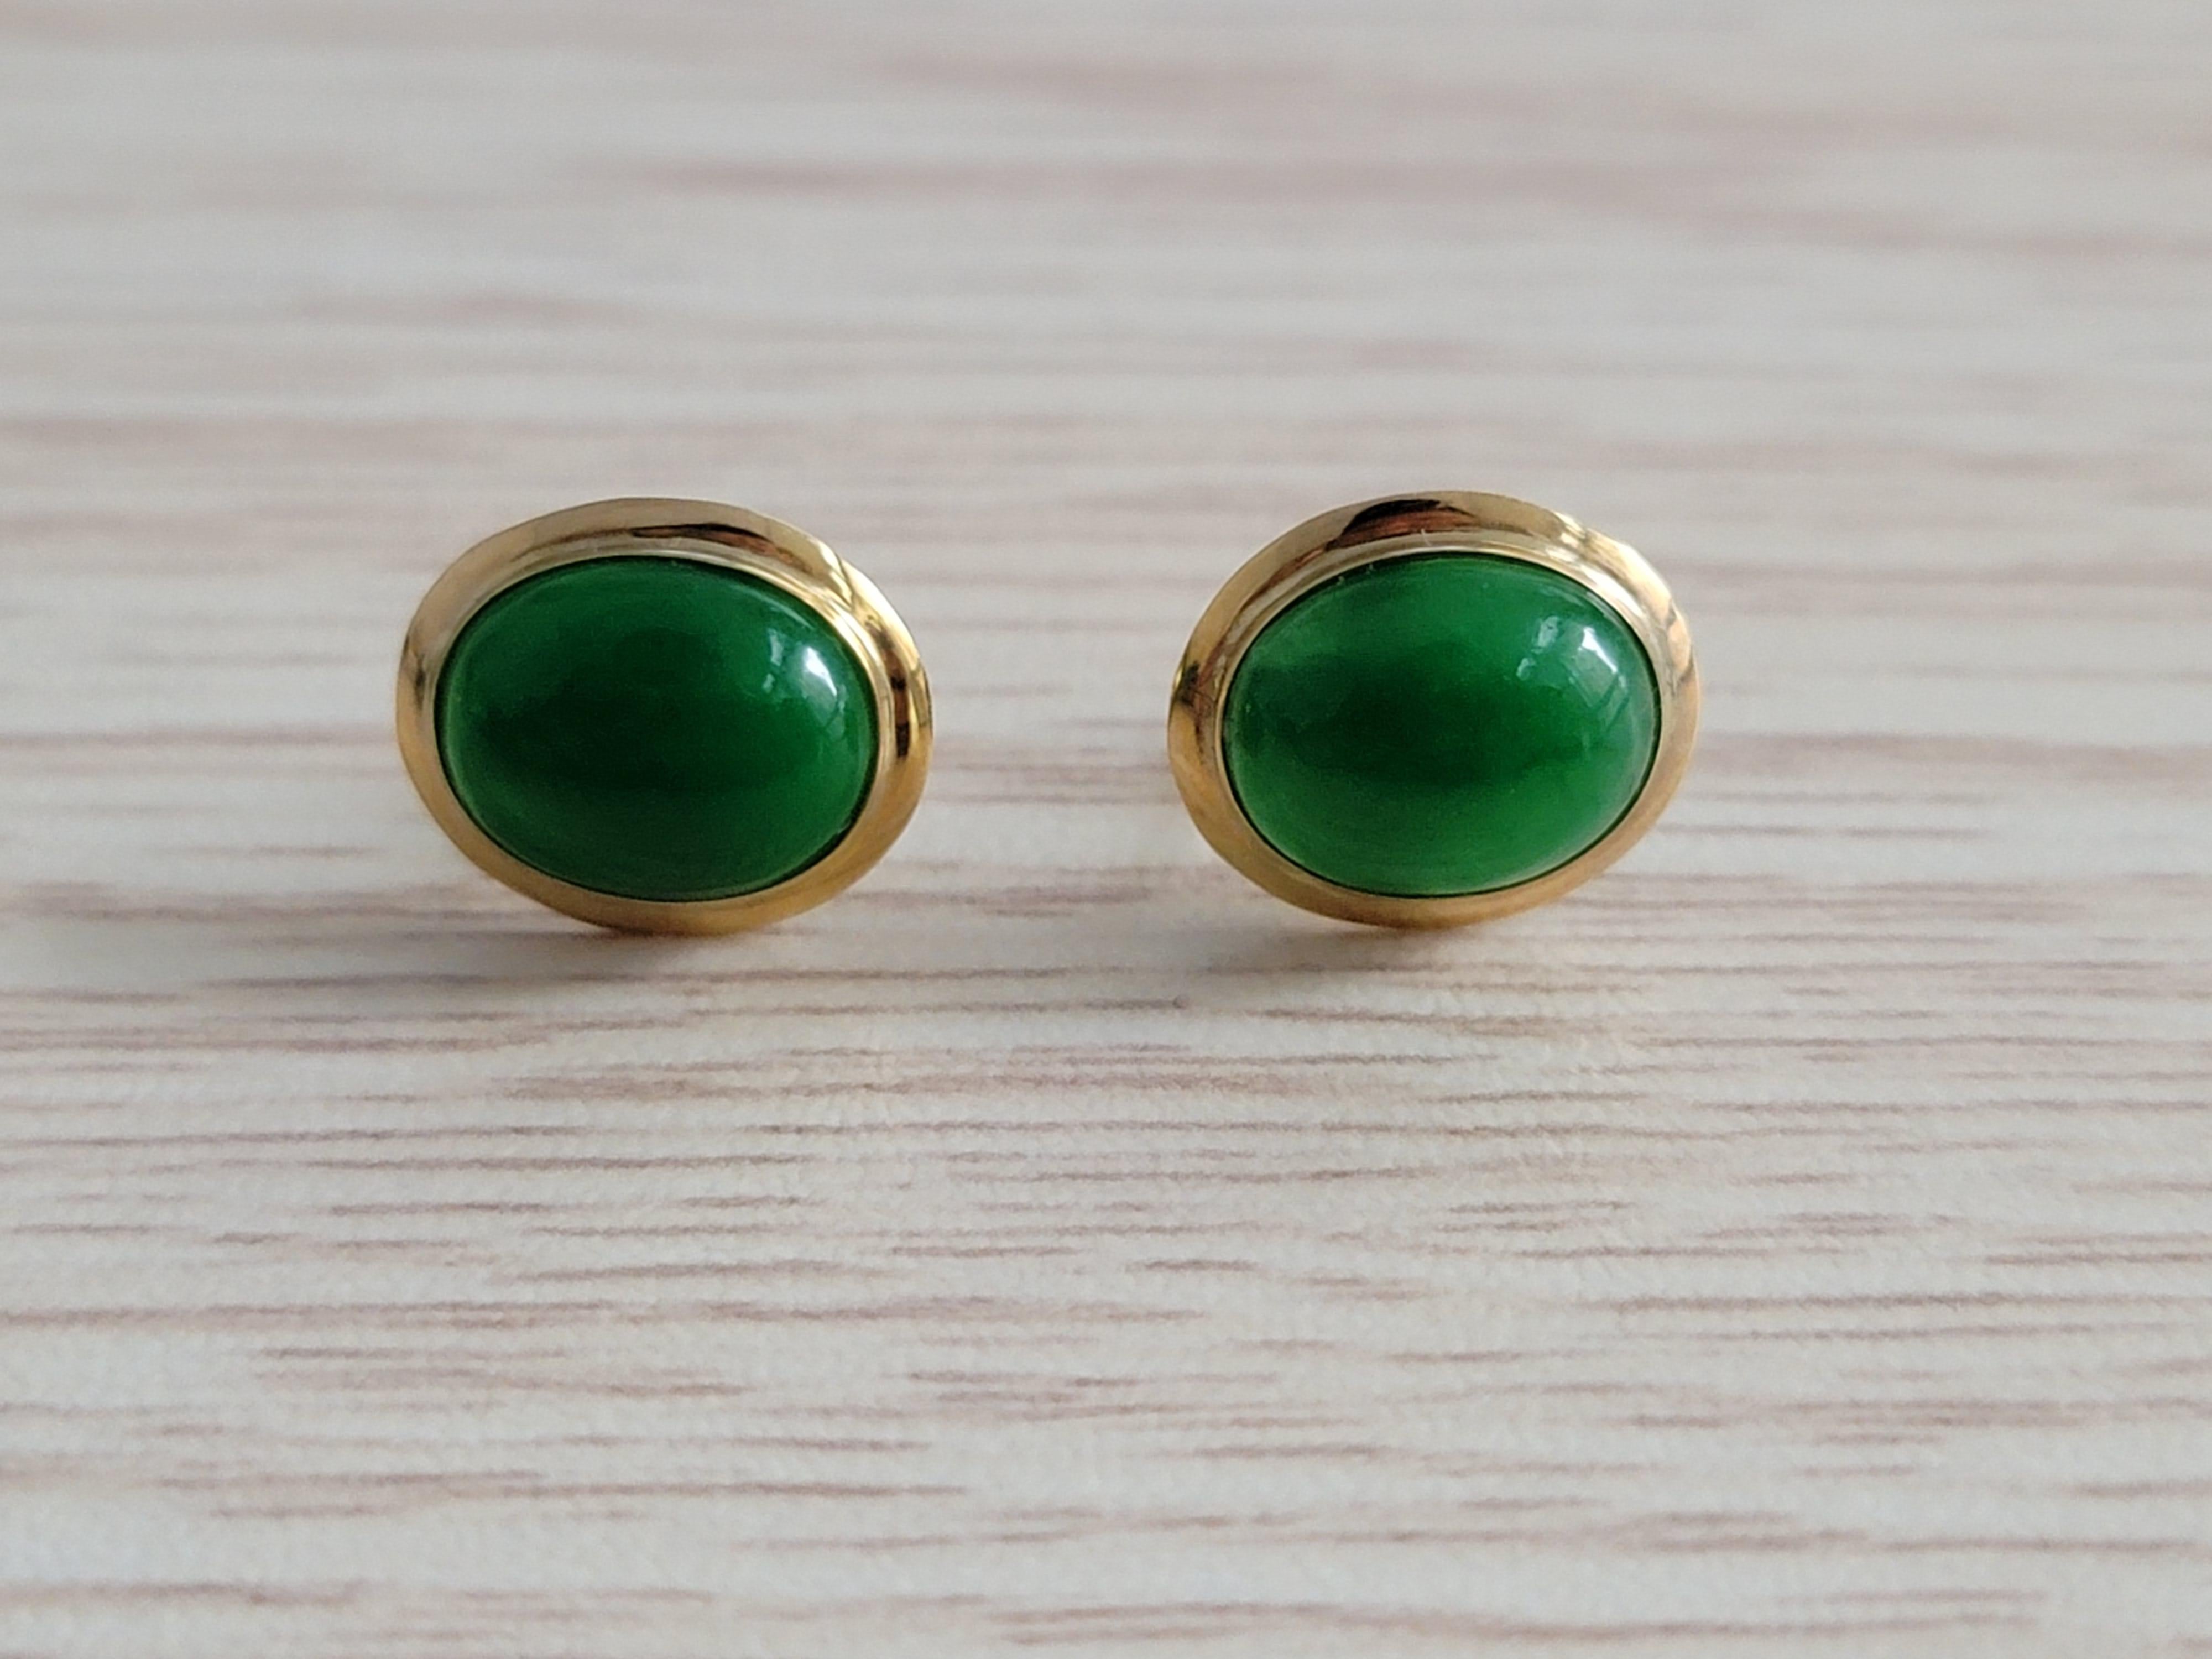 Stud Green Jadeite Earrings with solid 14K Yellow Gold. Jadeite Cabochon engulfed in 14K Yellow Gold Circumference and earring prongs with stud backs. 

The 'Qīng Zhong Jade Earrings’ represent nature’s colors in Mandarin and means clear or pure.